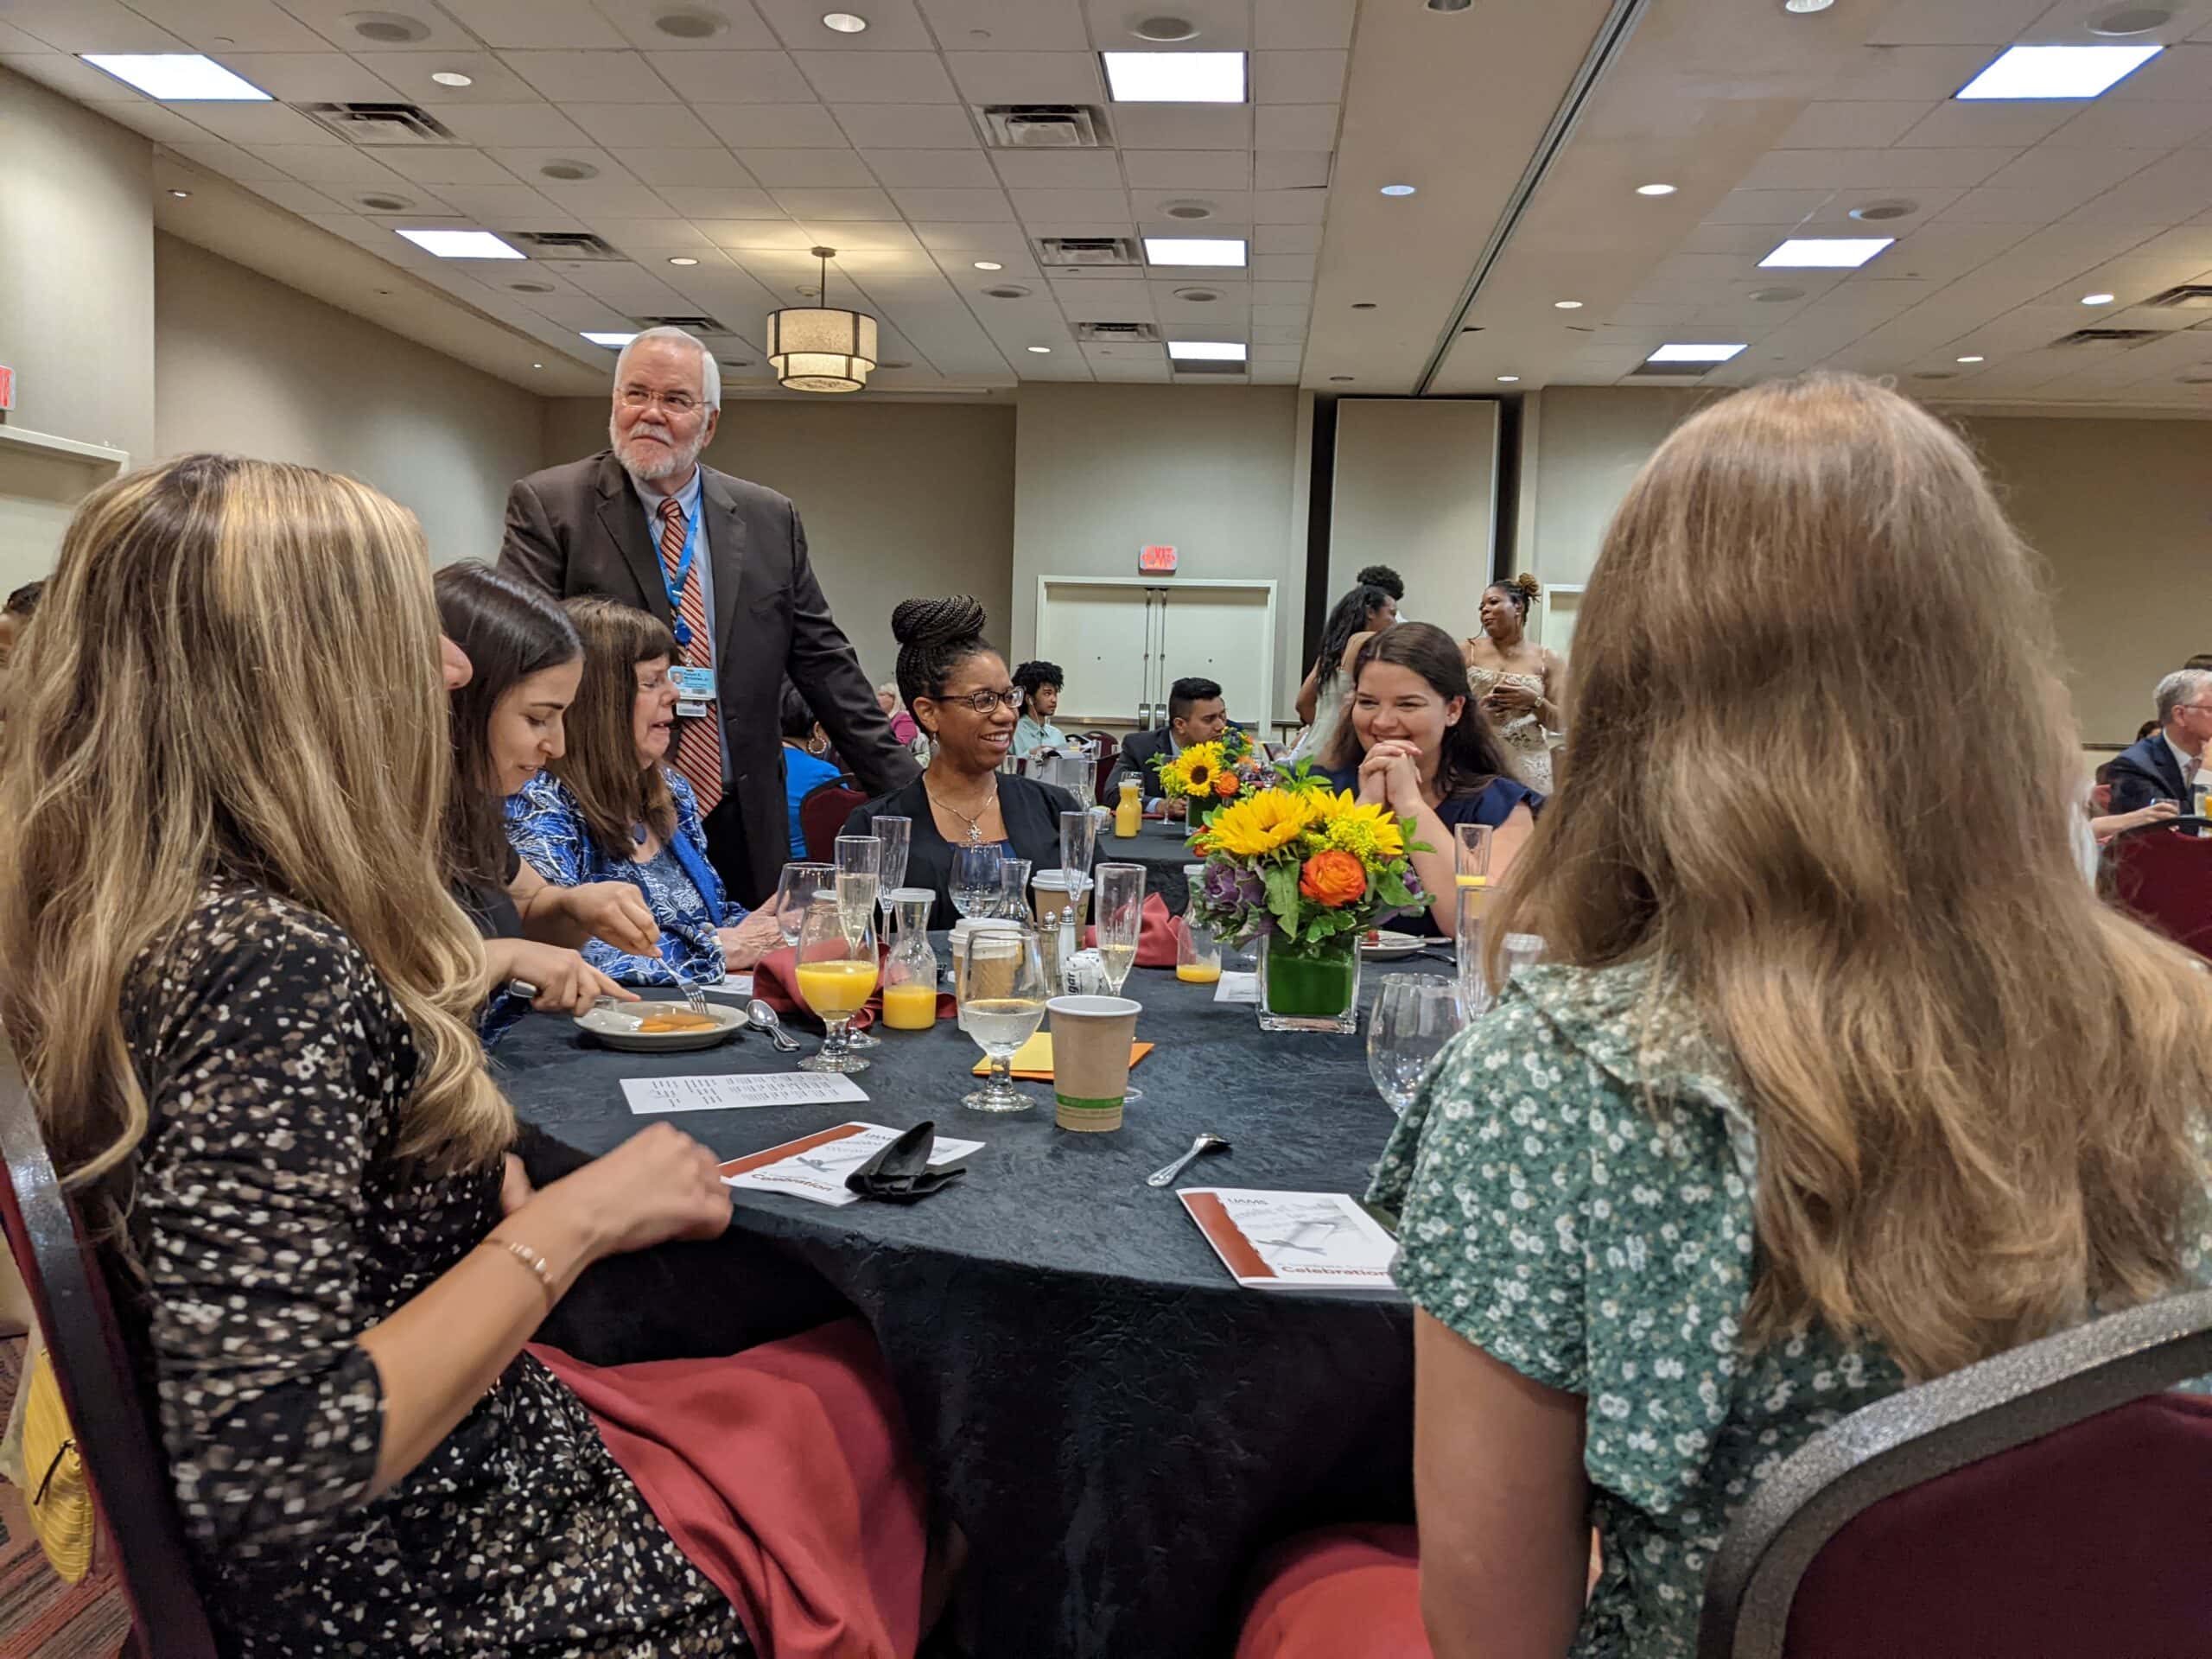 Robert McGehee, Ph.D., dean of the Graduate School, visits with the Class of 2022 during their Commencement Day brunch the morning of graduation.